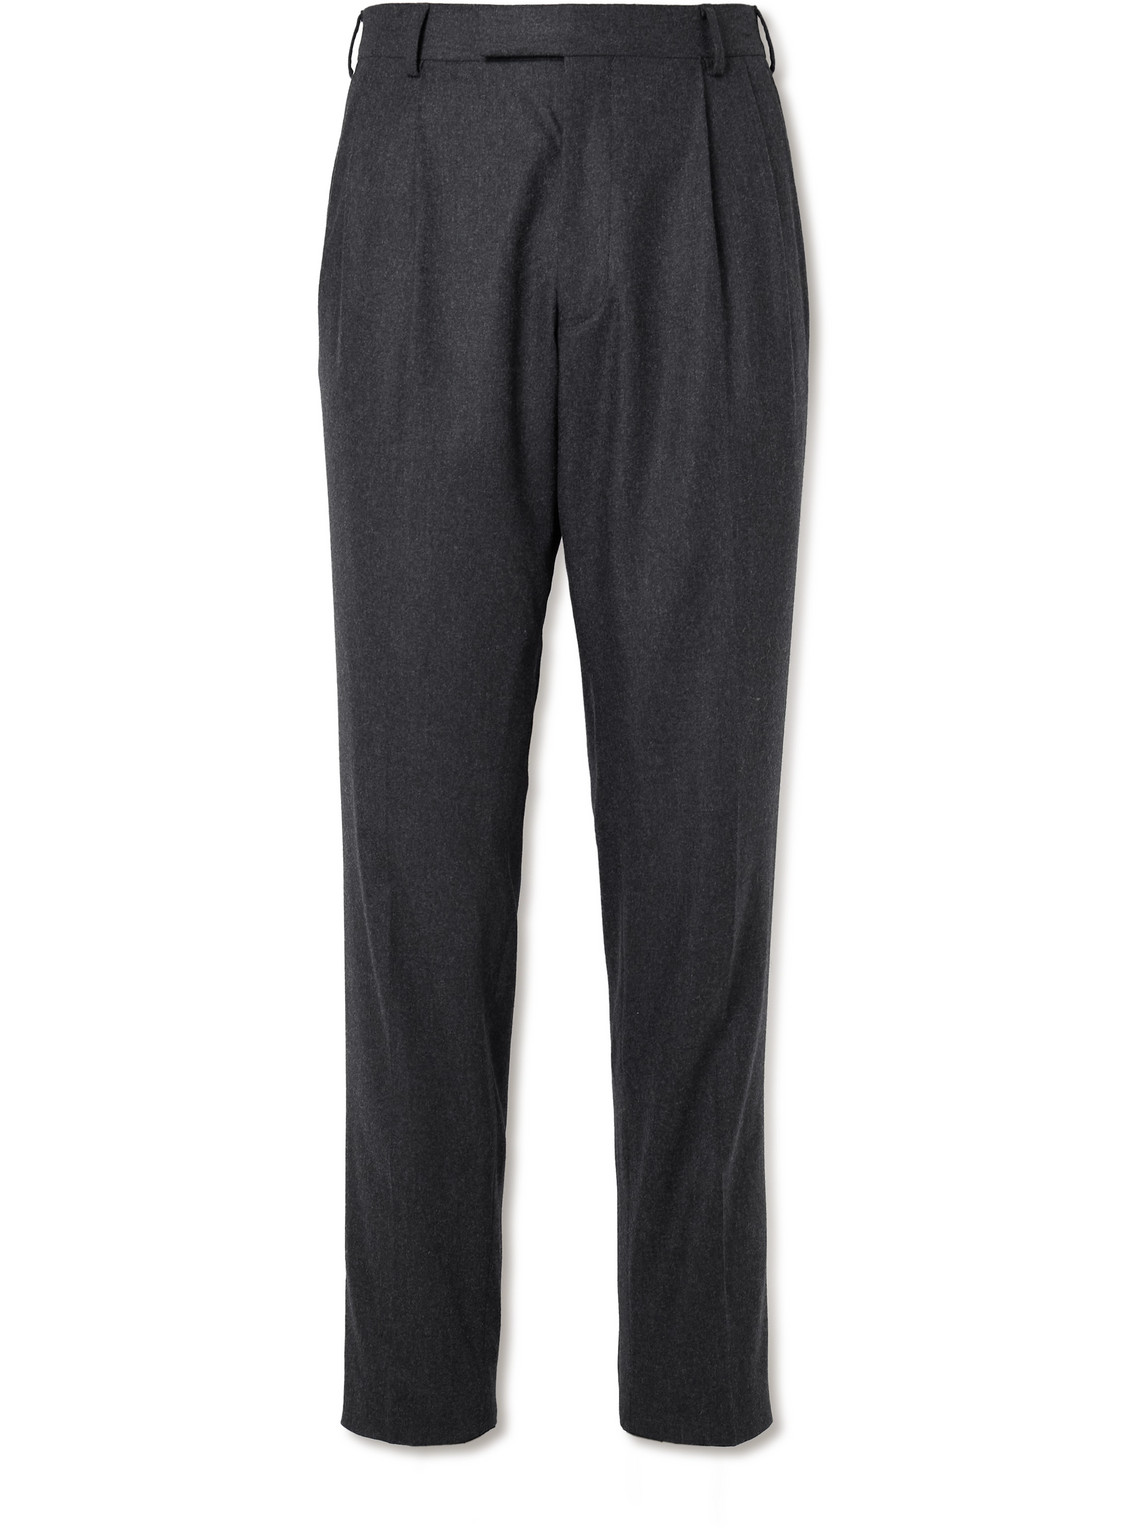 Mr P. - Tapered Pleated Wool-Blend Flannel Trousers - Men - Gray - 30 von Mr P.